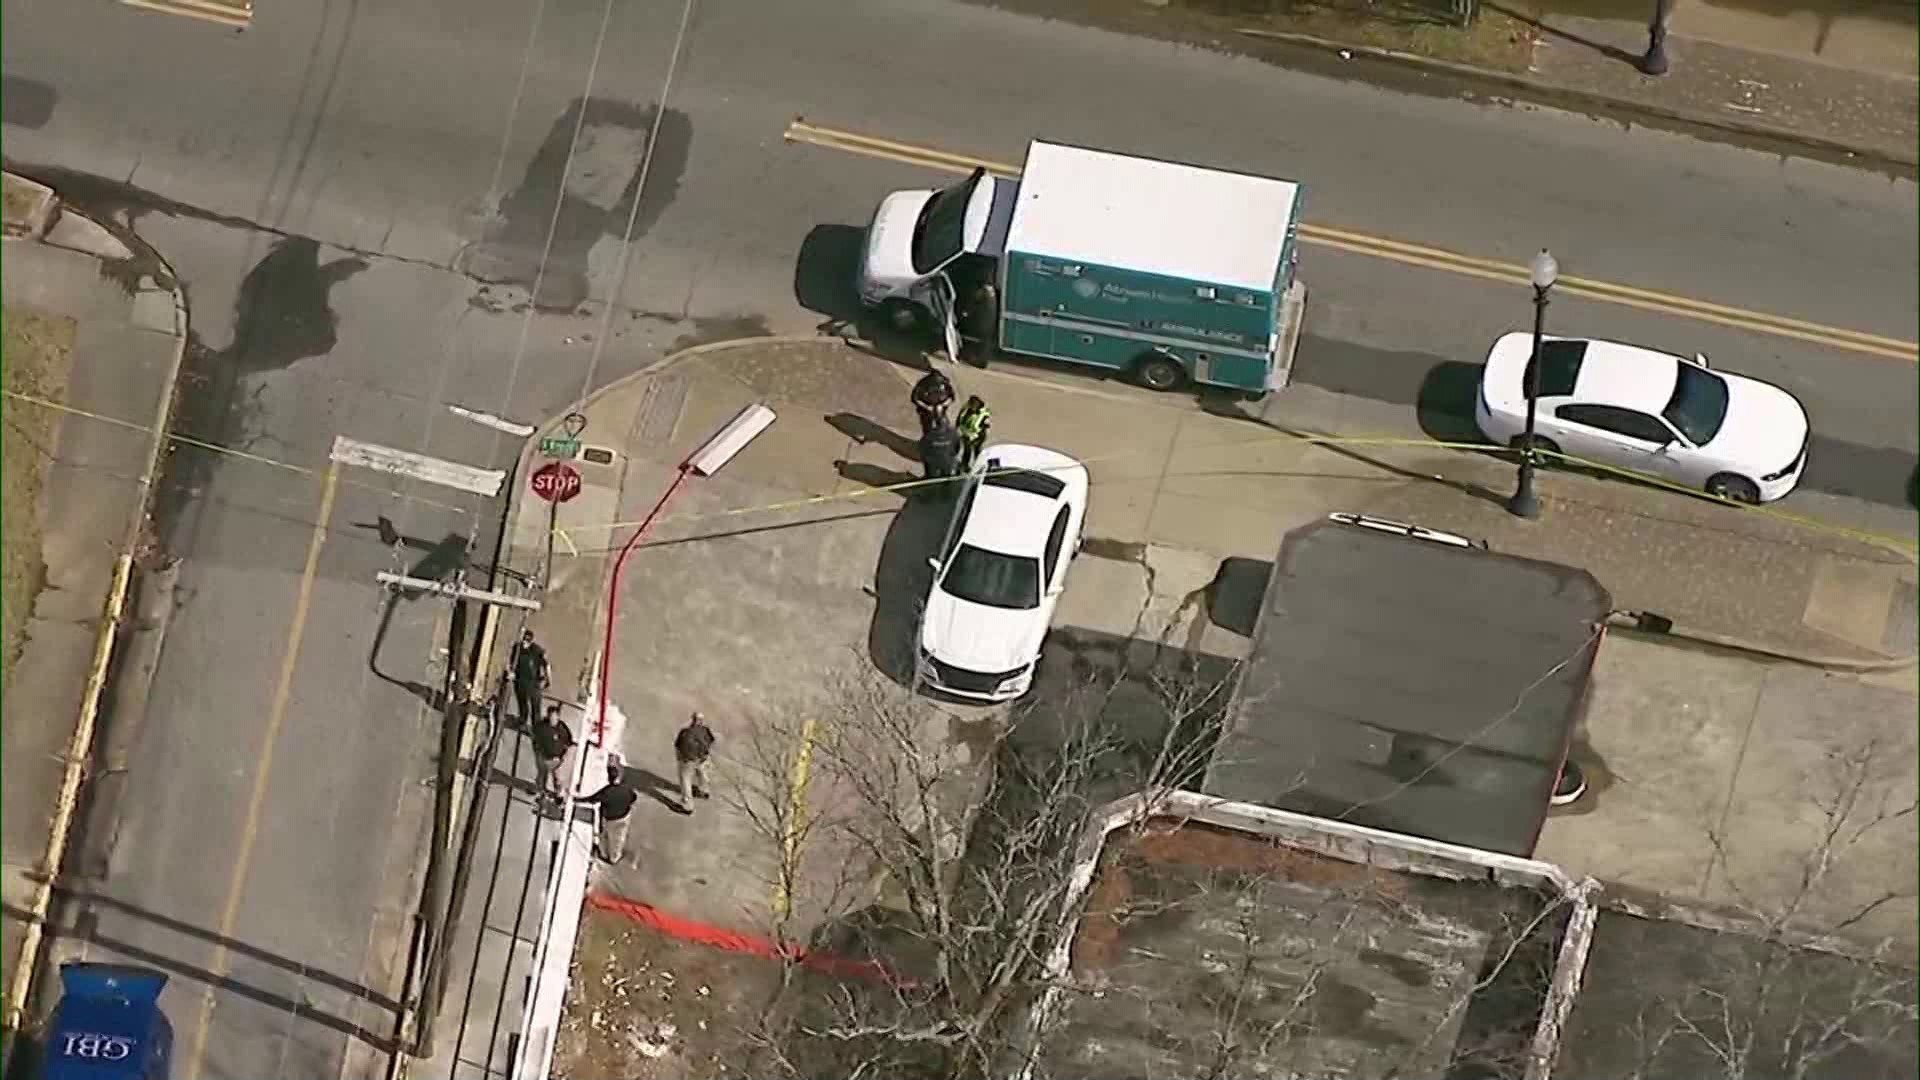 Officials with the Georgia Bureau of Investigation said the Rome Police Department was called to the 400 block of South Broad Street for a reported armed robbery.